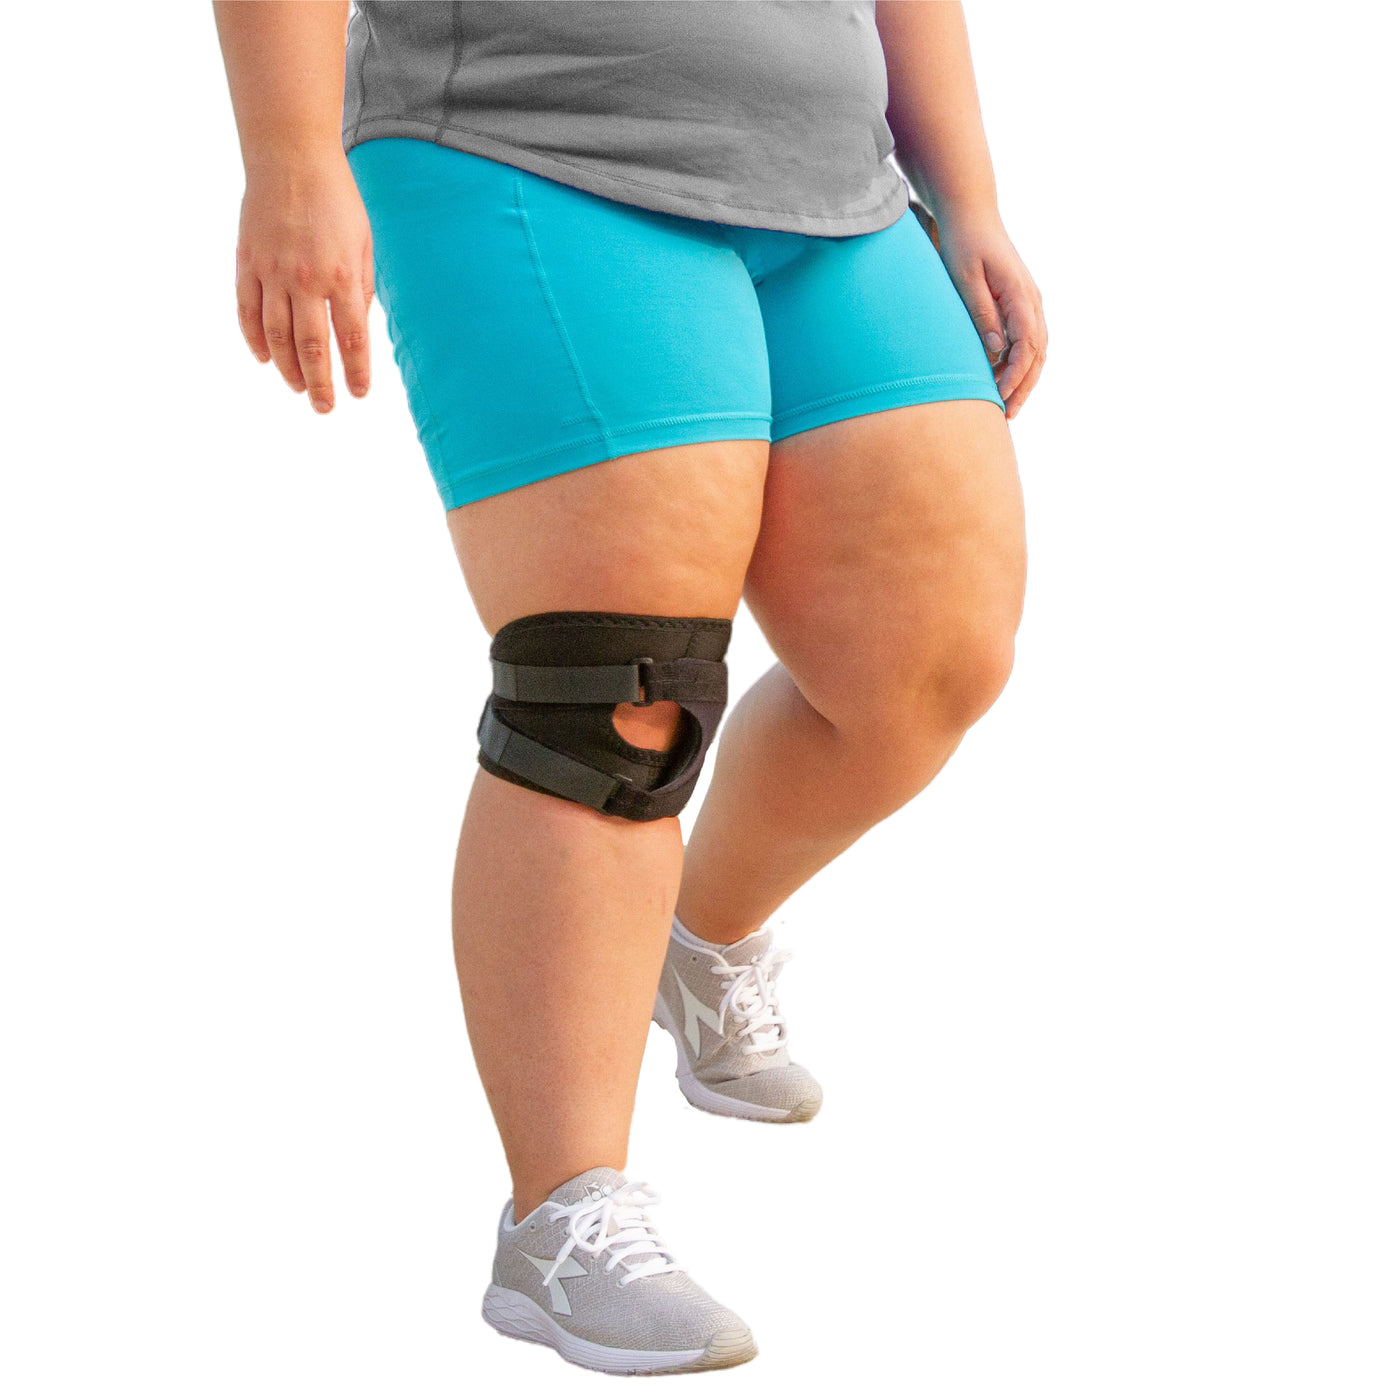 The plus size short patella tracking knee brace stays in place while walking and running  hide_on_site